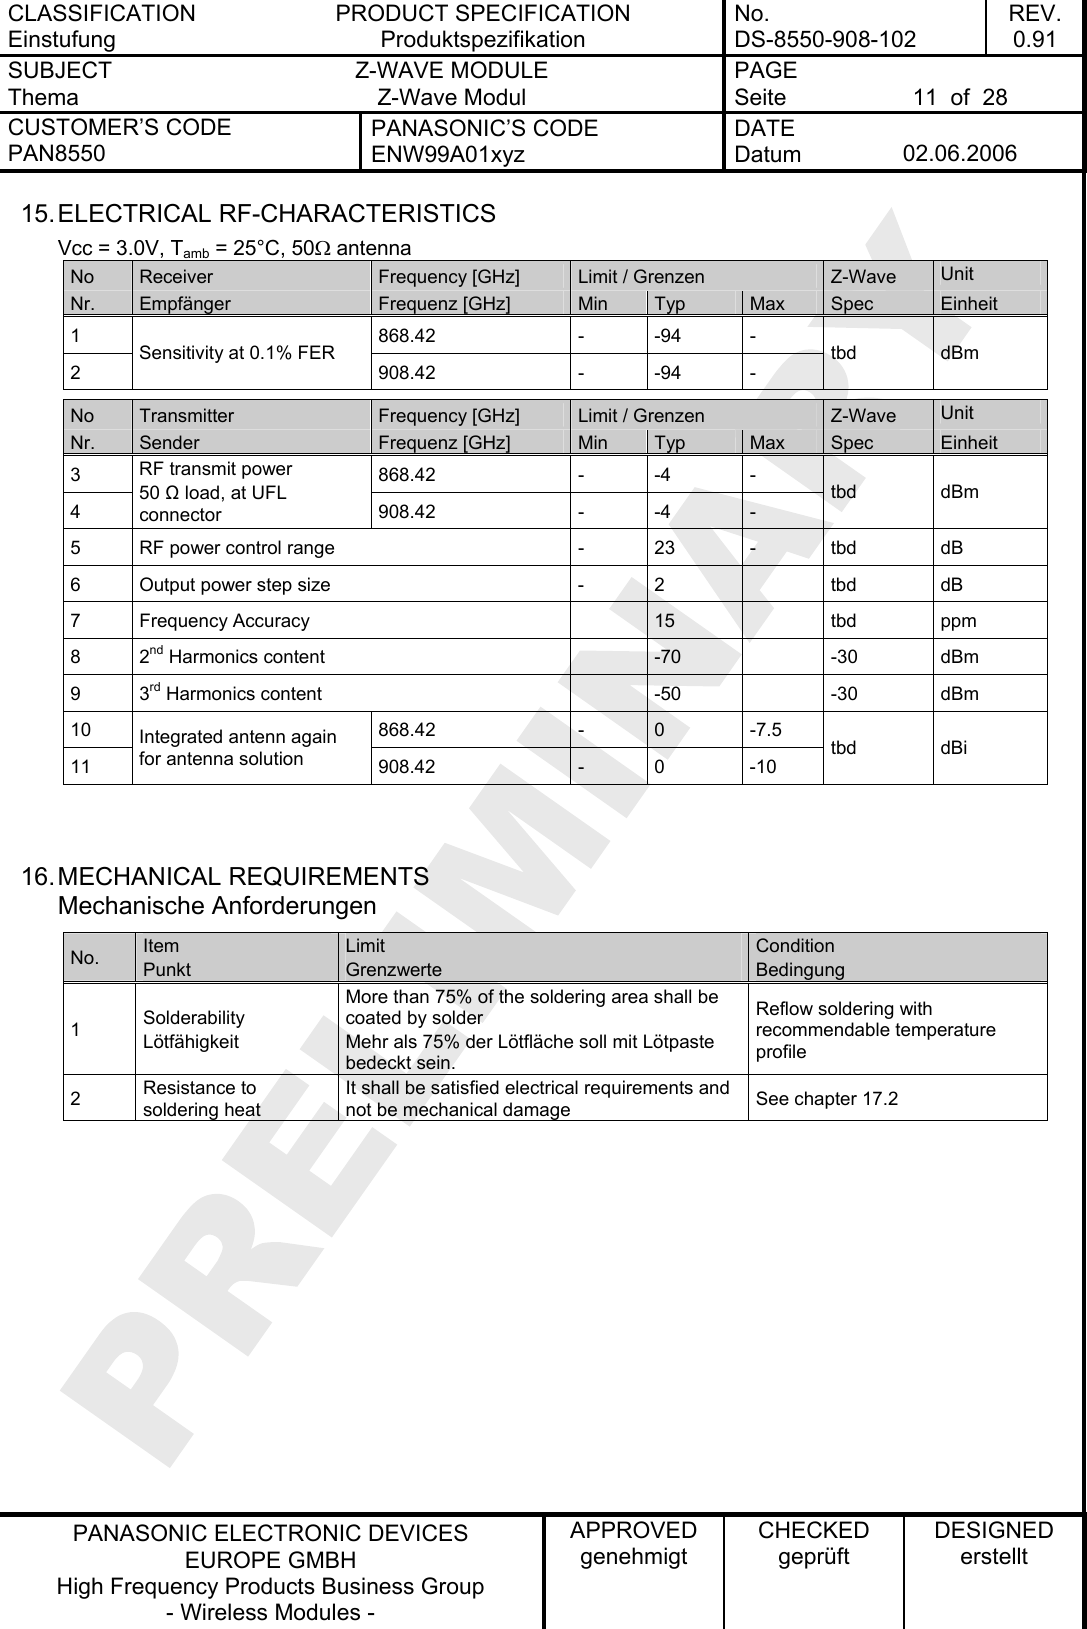 CLASSIFICATION Einstufung PRODUCT SPECIFICATION Produktspezifikation No. DS-8550-908-102 REV. 0.91 SUBJECT Thema Z-WAVE MODULE Z-Wave Modul PAGE Seite  11  of  28 CUSTOMER’S CODE PAN8550 PANASONIC’S CODE ENW99A01xyz DATE Datum  02.06.2006   PANASONIC ELECTRONIC DEVICES EUROPE GMBH High Frequency Products Business Group - Wireless Modules - APPROVED genehmigt CHECKED geprüft DESIGNED erstellt 15. ELECTRICAL  RF-CHARACTERISTICS Vcc = 3.0V, Tamb = 25°C, 50Ω antenna No  Receiver  Frequency [GHz]  Limit / Grenzen  Z-Wave  Unit Nr.  Empfänger  Frequenz [GHz]  Min  Typ  Max  Spec  Einheit 1 868.42 - -94 - 2  Sensitivity at 0.1% FER  908.42 - -94 - tbd dBm  No  Transmitter  Frequency [GHz]  Limit / Grenzen  Z-Wave  Unit Nr.  Sender  Frequenz [GHz]  Min  Typ  Max  Spec  Einheit 3 868.42 - -4 - 4 RF transmit power 50  load, at UFL connector  908.42 - -4 - tbd dBm 5  RF power control range  -  23  -  tbd  dB 6  Output power step size  -  2    tbd  dB 7 Frequency Accuracy    15    tbd  ppm 8 2nd Harmonics content    -70    -30  dBm 9 3rd Harmonics content    -50    -30  dBm 10 868.42 - 0 -7.5 11 Integrated antenn again for antenna solution  908.42 - 0 -10 tbd dBi   16. MECHANICAL  REQUIREMENTS Mechanische Anforderungen No.  Item Punkt Limit Grenzwerte Condition Bedingung 1  Solderability Lötfähigkeit More than 75% of the soldering area shall be coated by solder Mehr als 75% der Lötfläche soll mit Lötpaste bedeckt sein. Reflow soldering with recommendable temperature profile 2  Resistance to soldering heat It shall be satisfied electrical requirements and not be mechanical damage  See chapter 17.2   